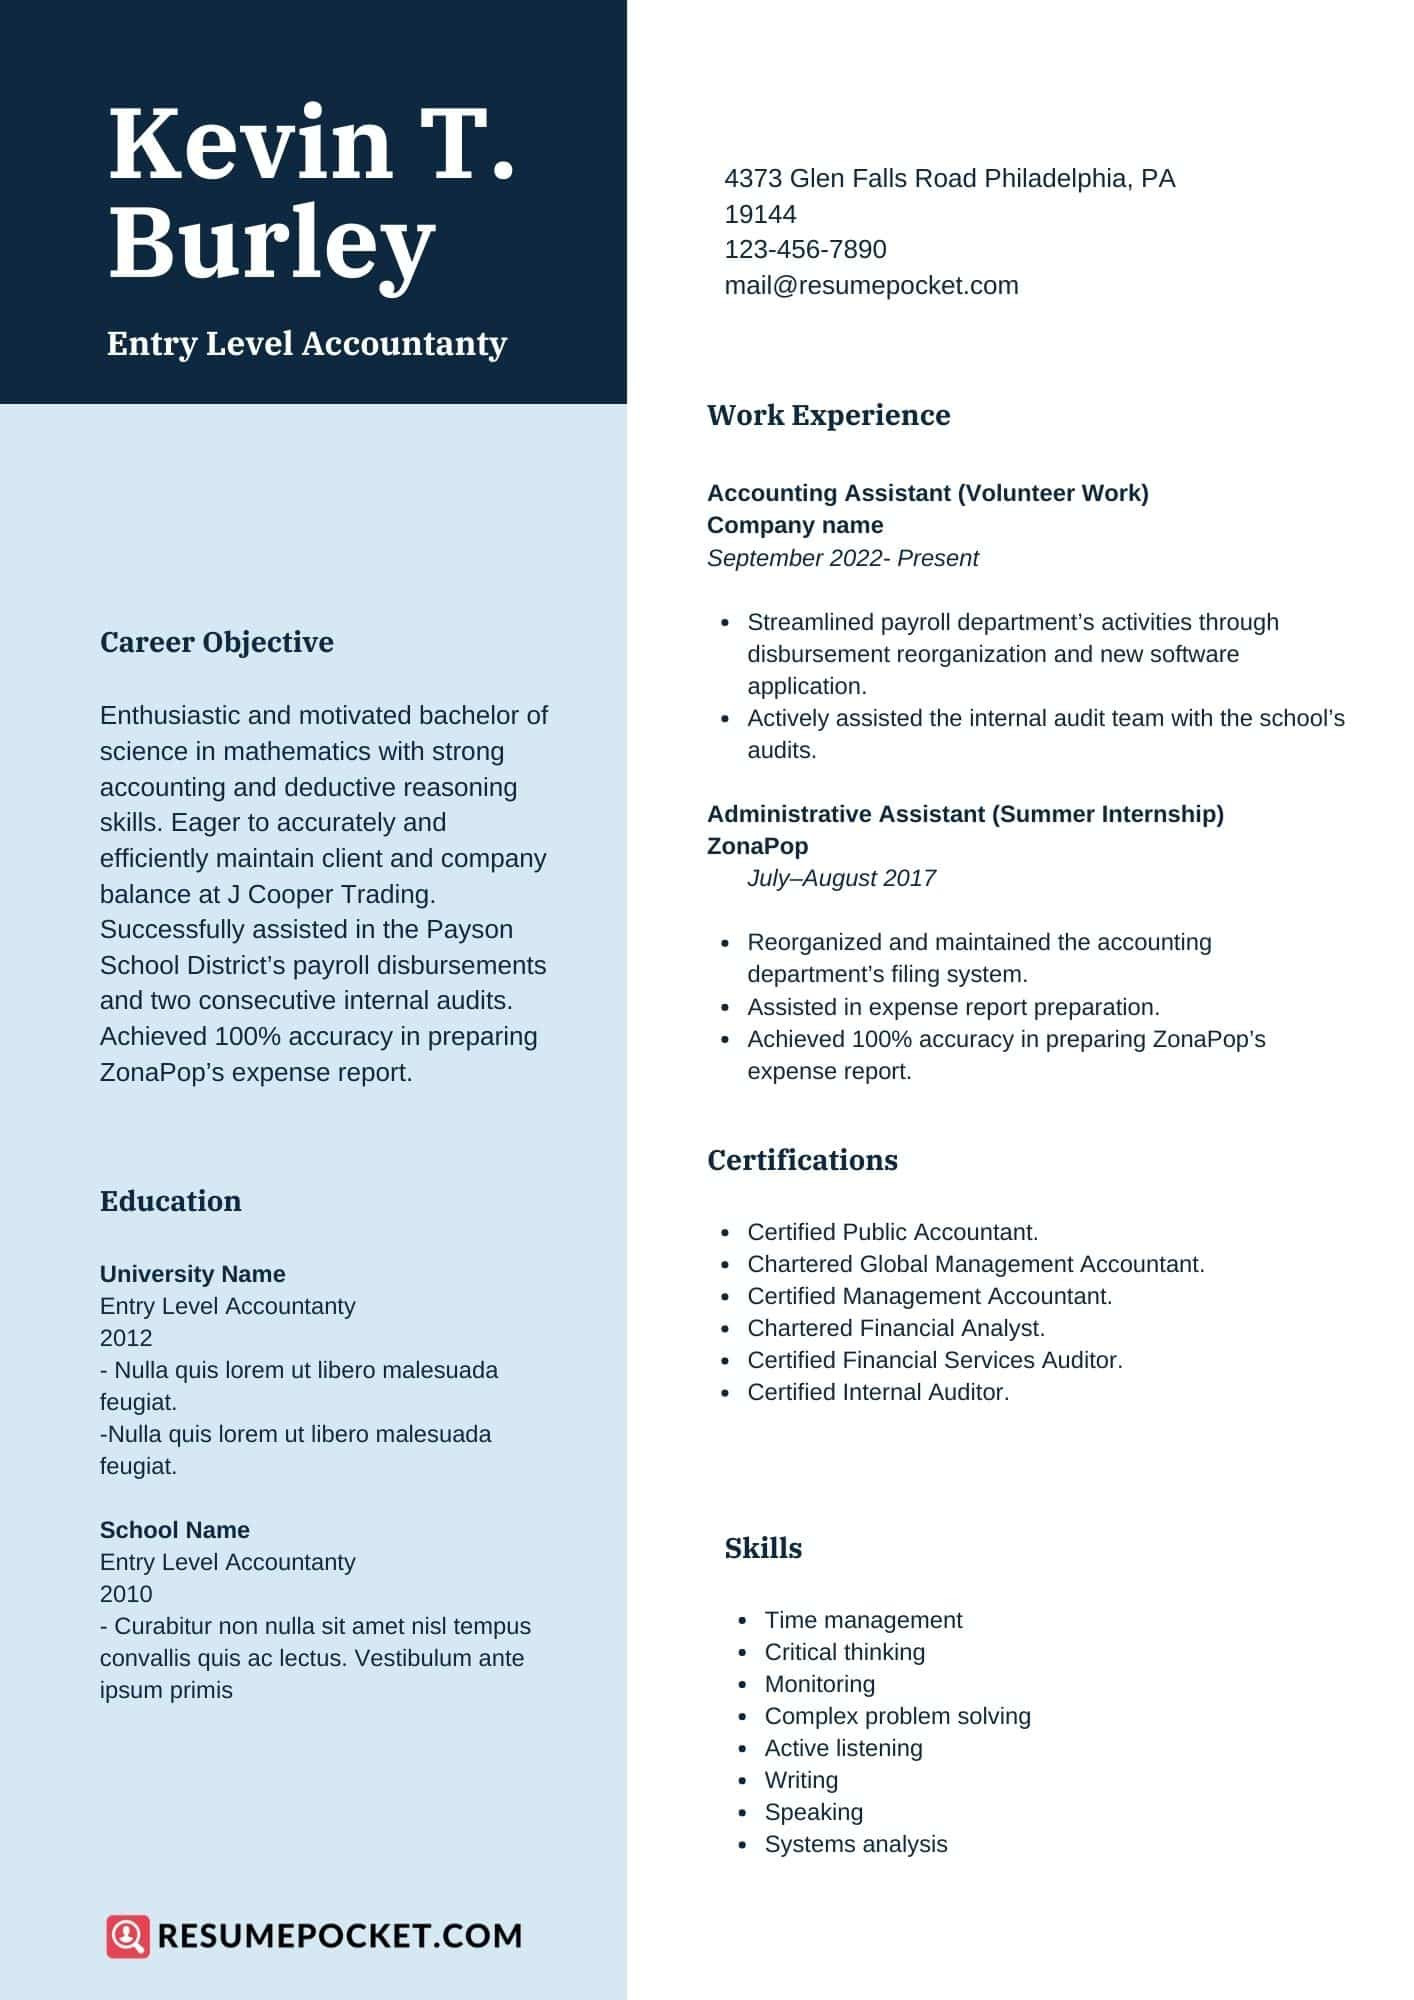 Entry Level Staff Accountant Resume Samples Entry Level Accountant Resume Samples – Resumepocket